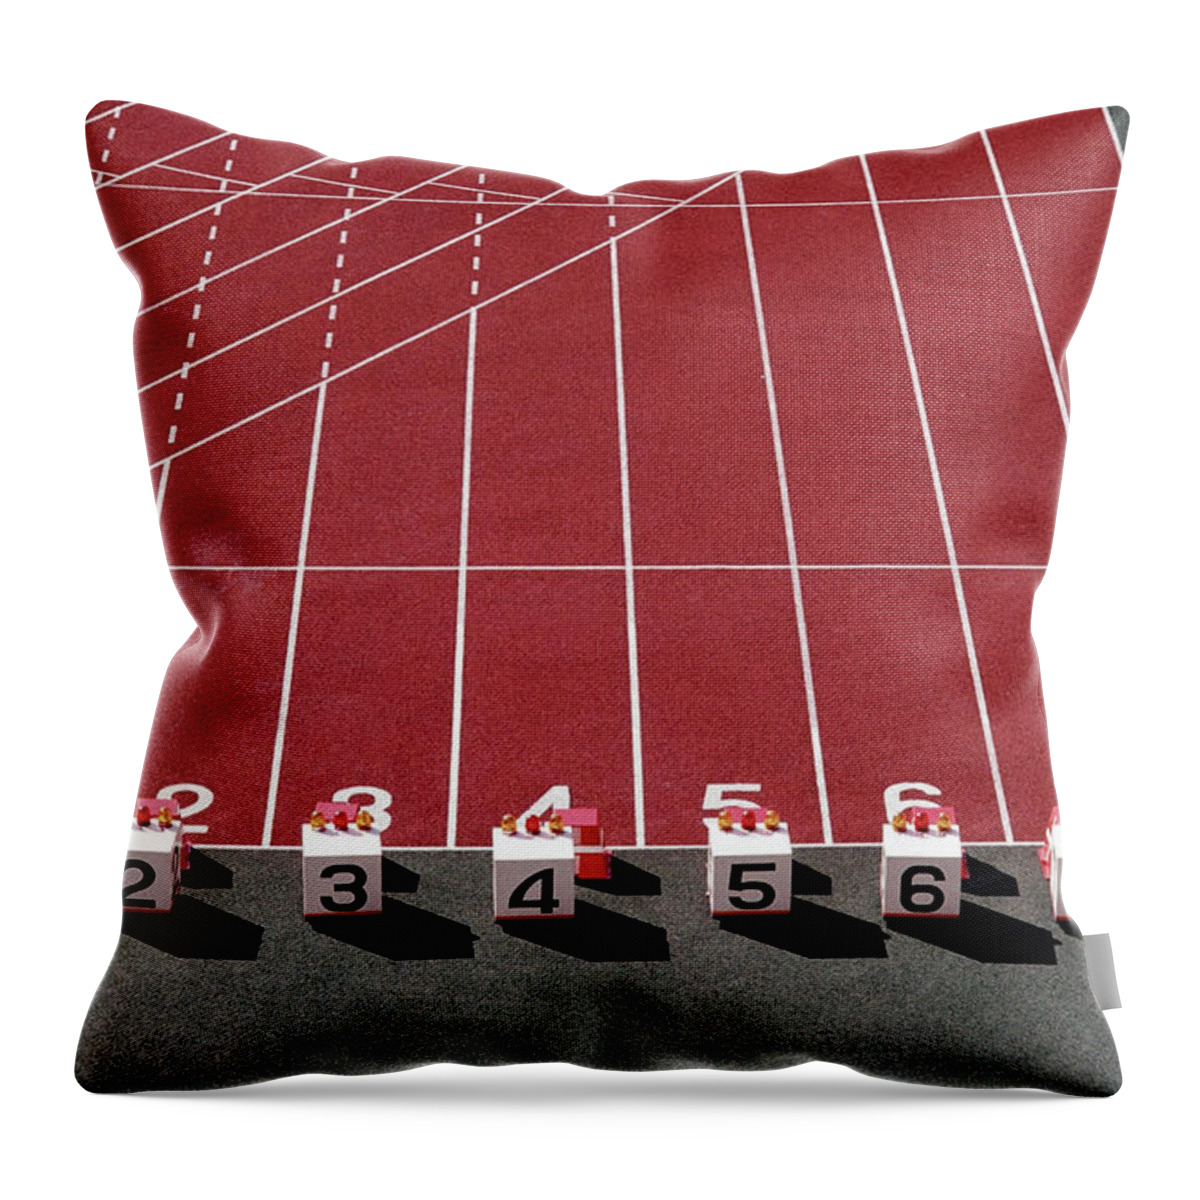 Number 7 Throw Pillow featuring the photograph Starting Blocks On Track, Elevated View by Grant Faint